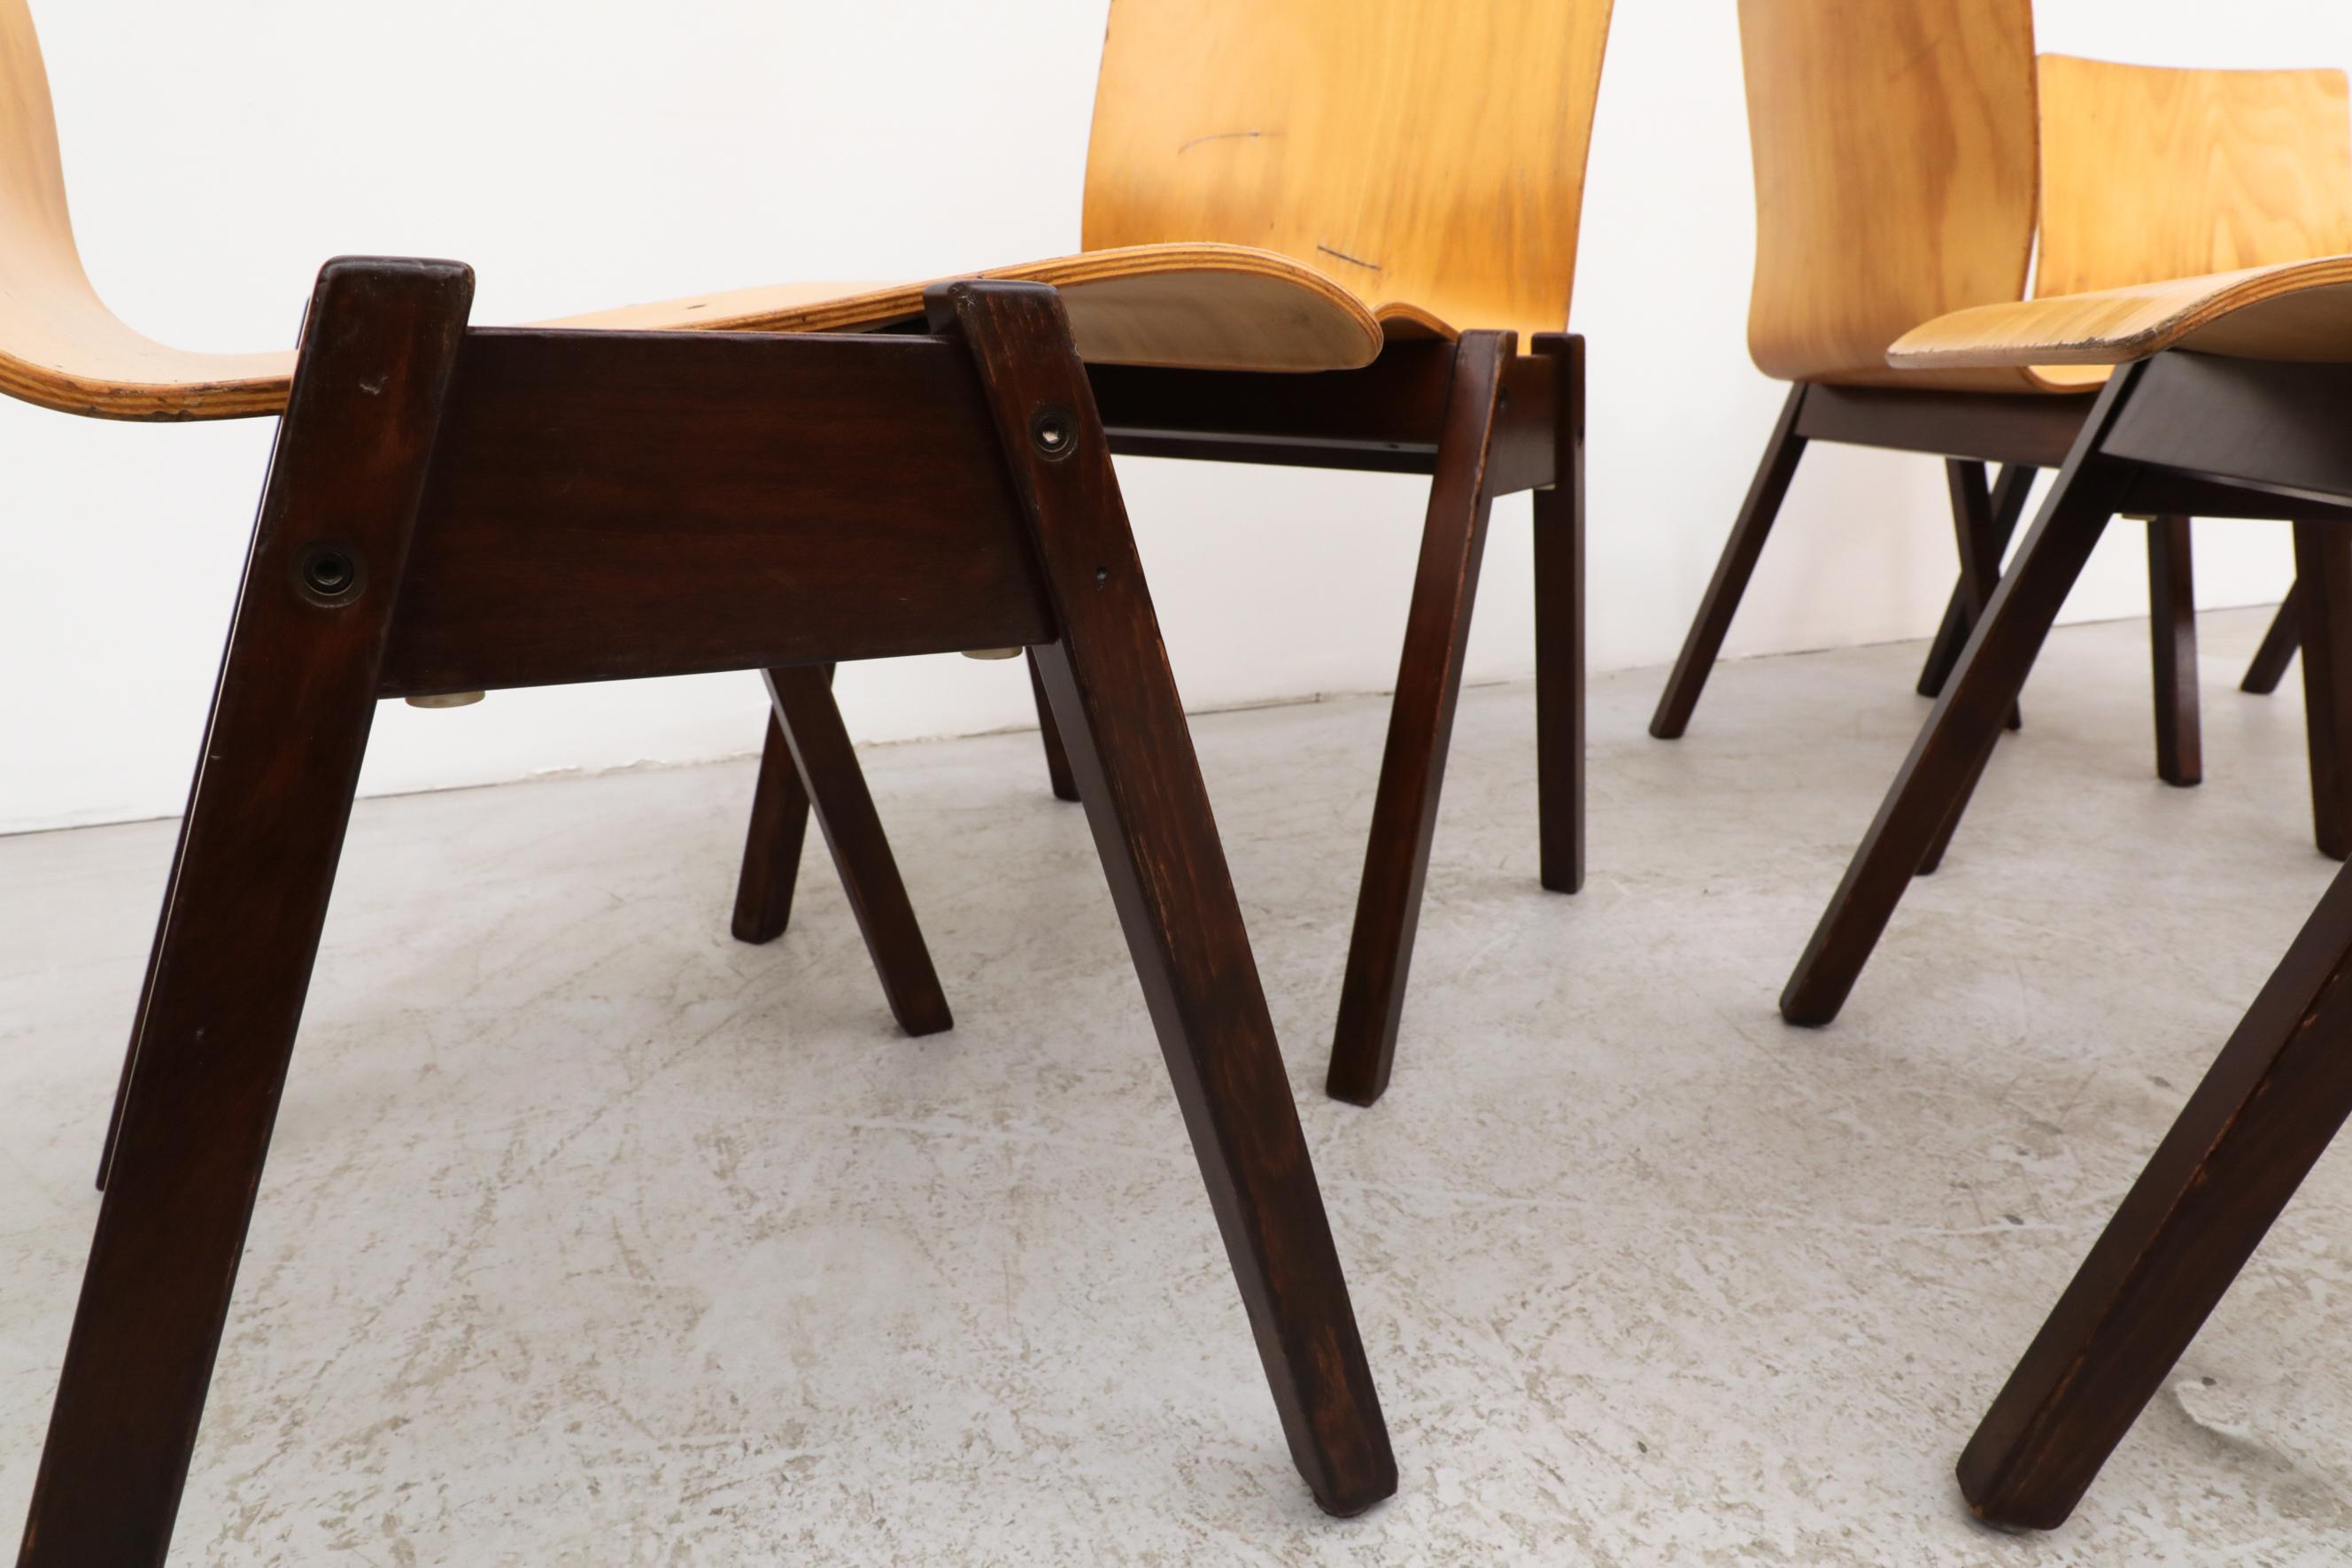 Roland Rainer Style Stacking Chairs Honey Beech & Dark Brown Stained Wood Legs For Sale 5